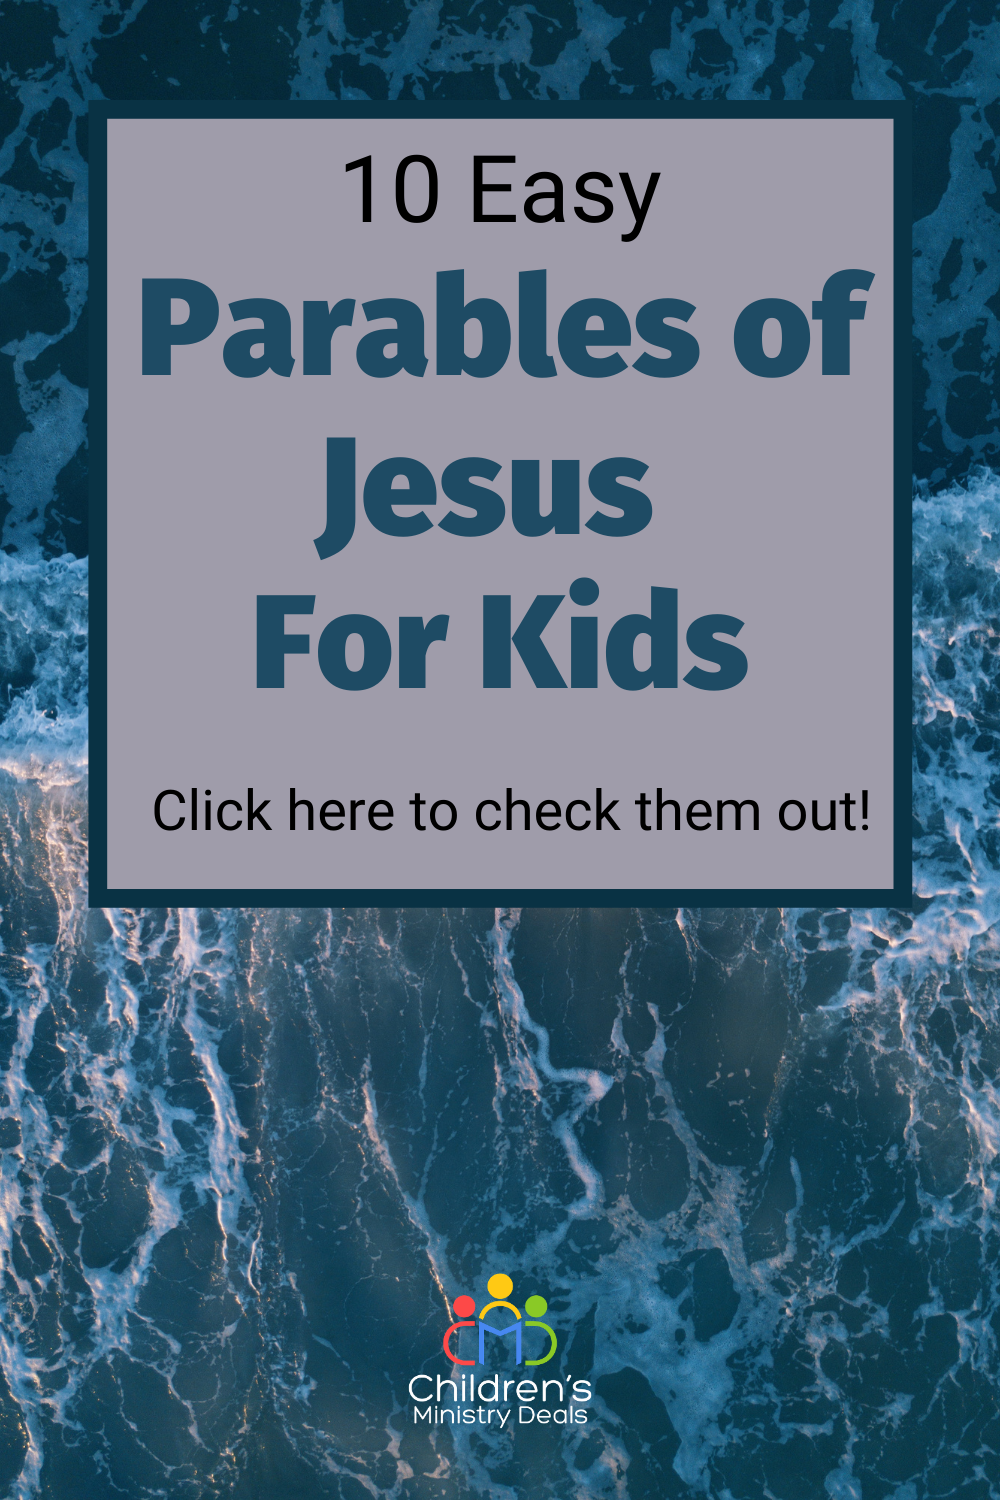 What Are the Parables for Kids in Simple Terms?